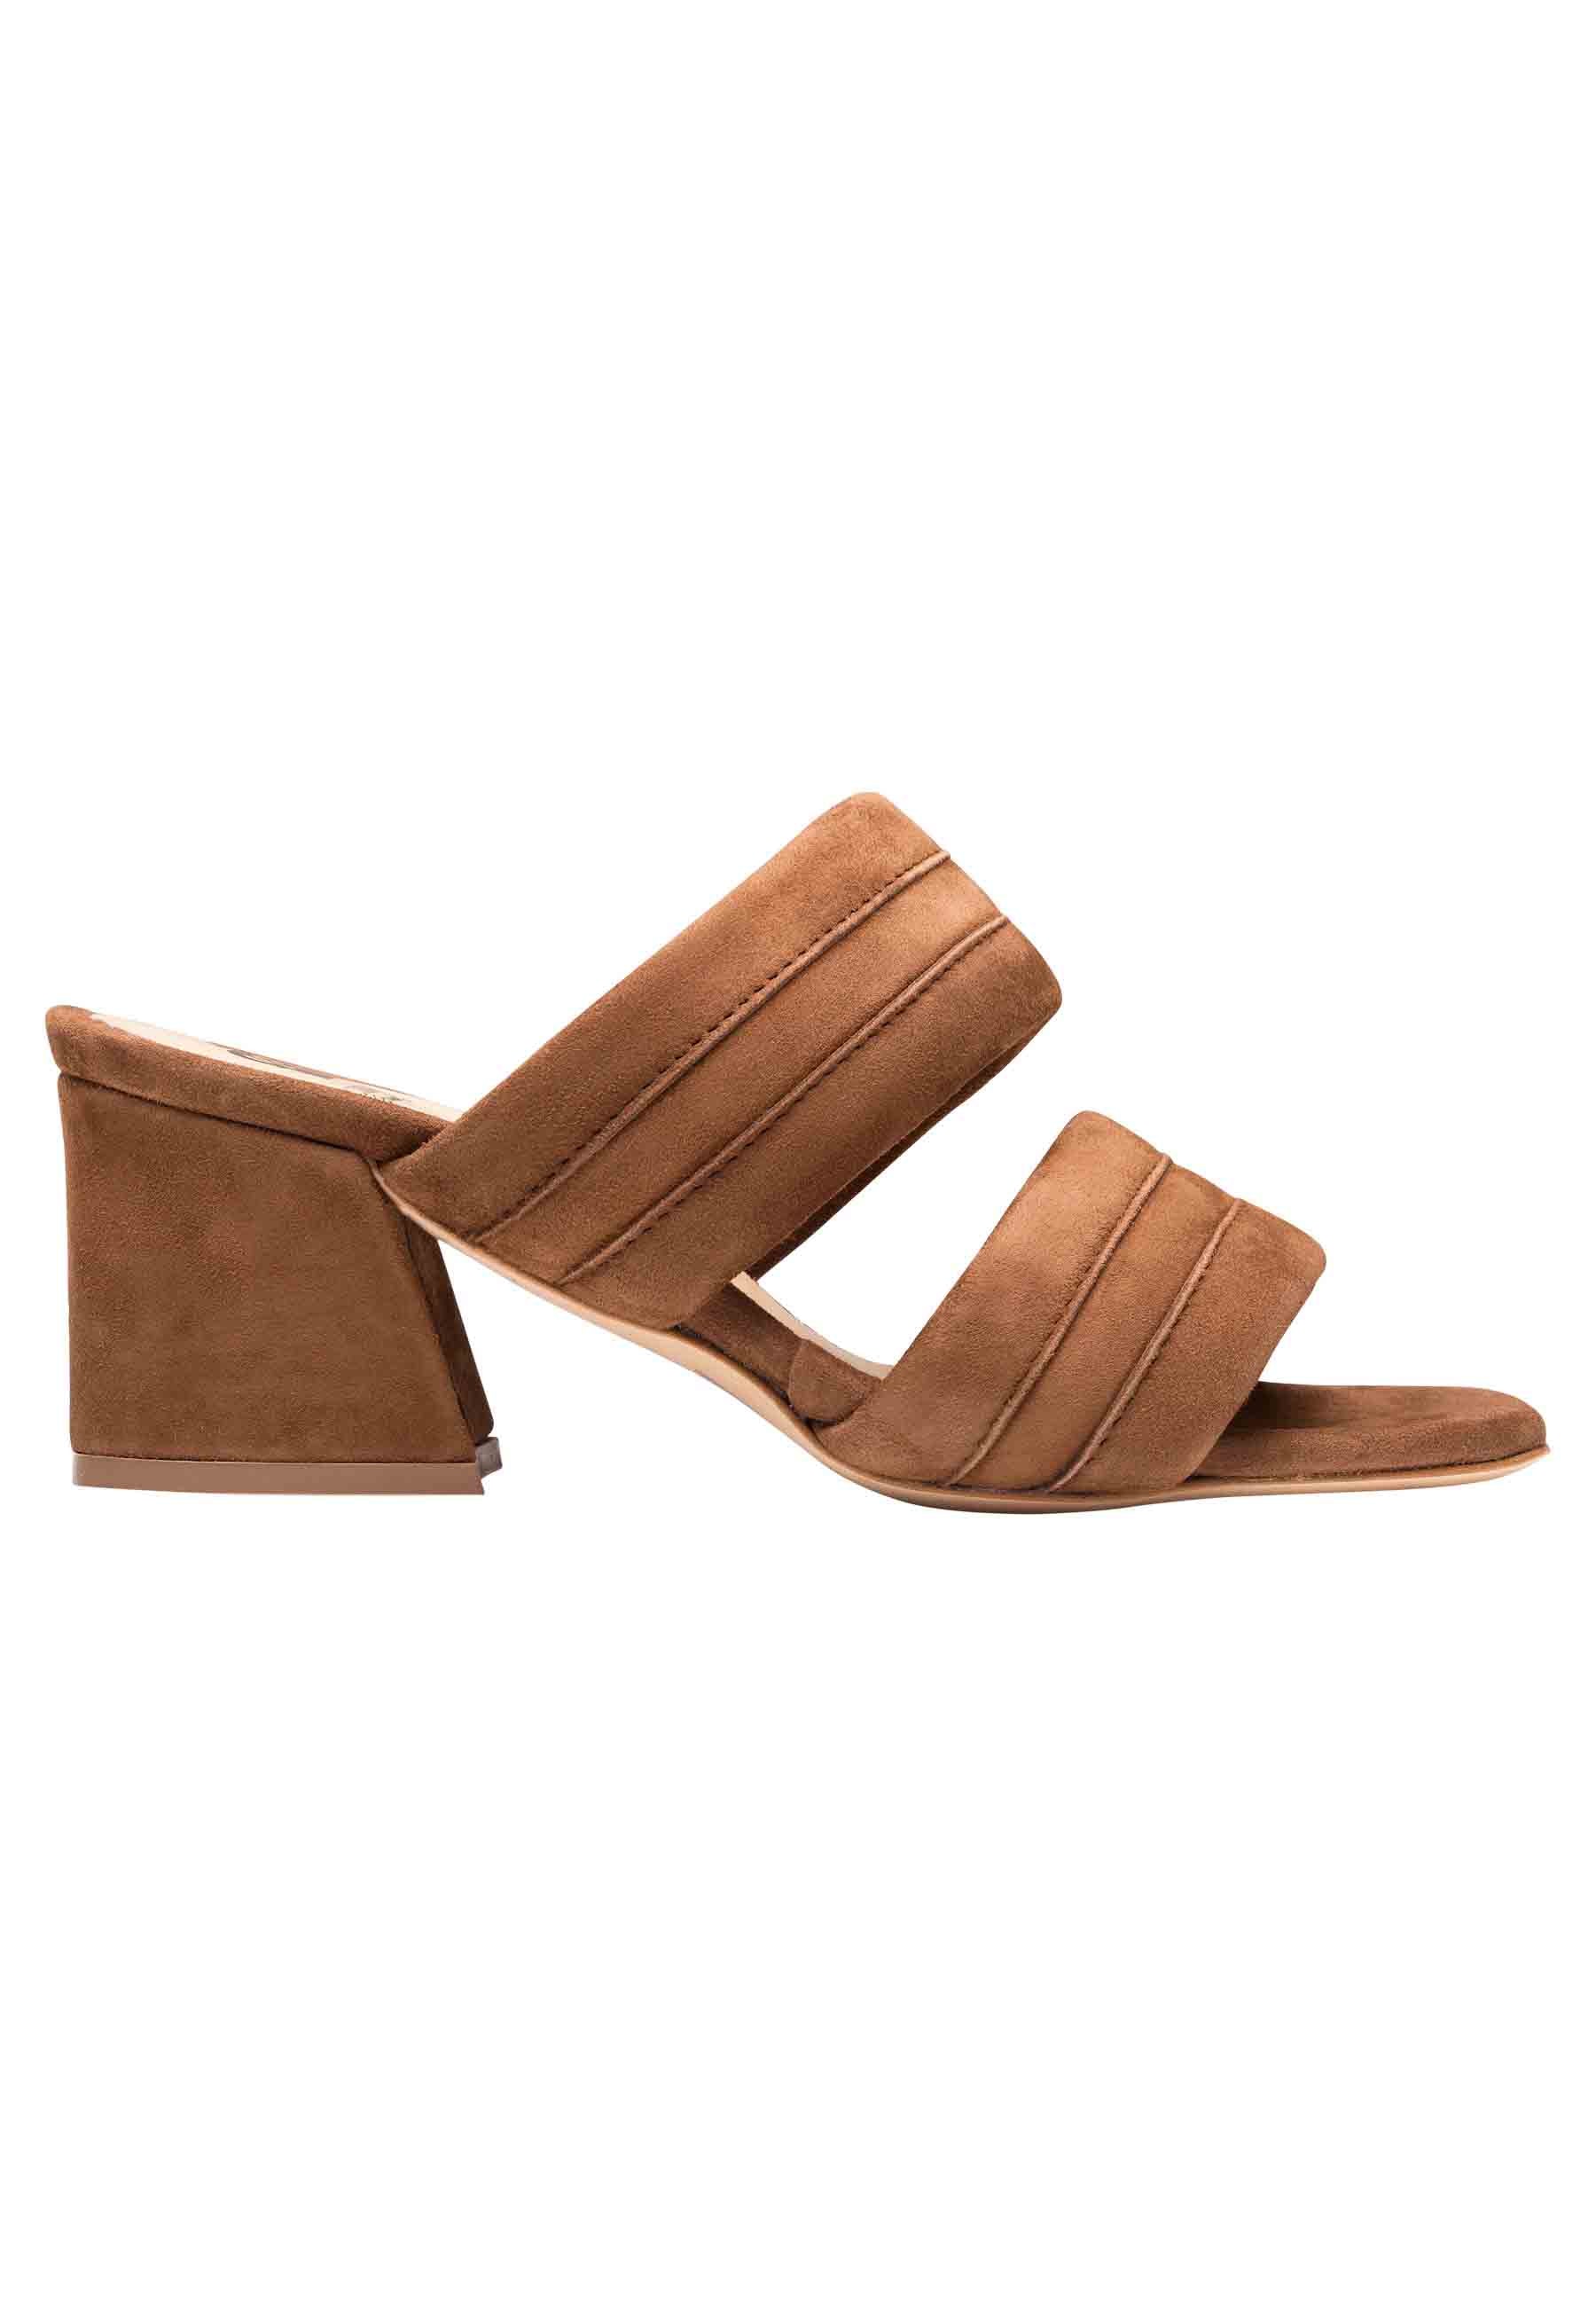 Women's sandals in brown suede with double band and medium heel